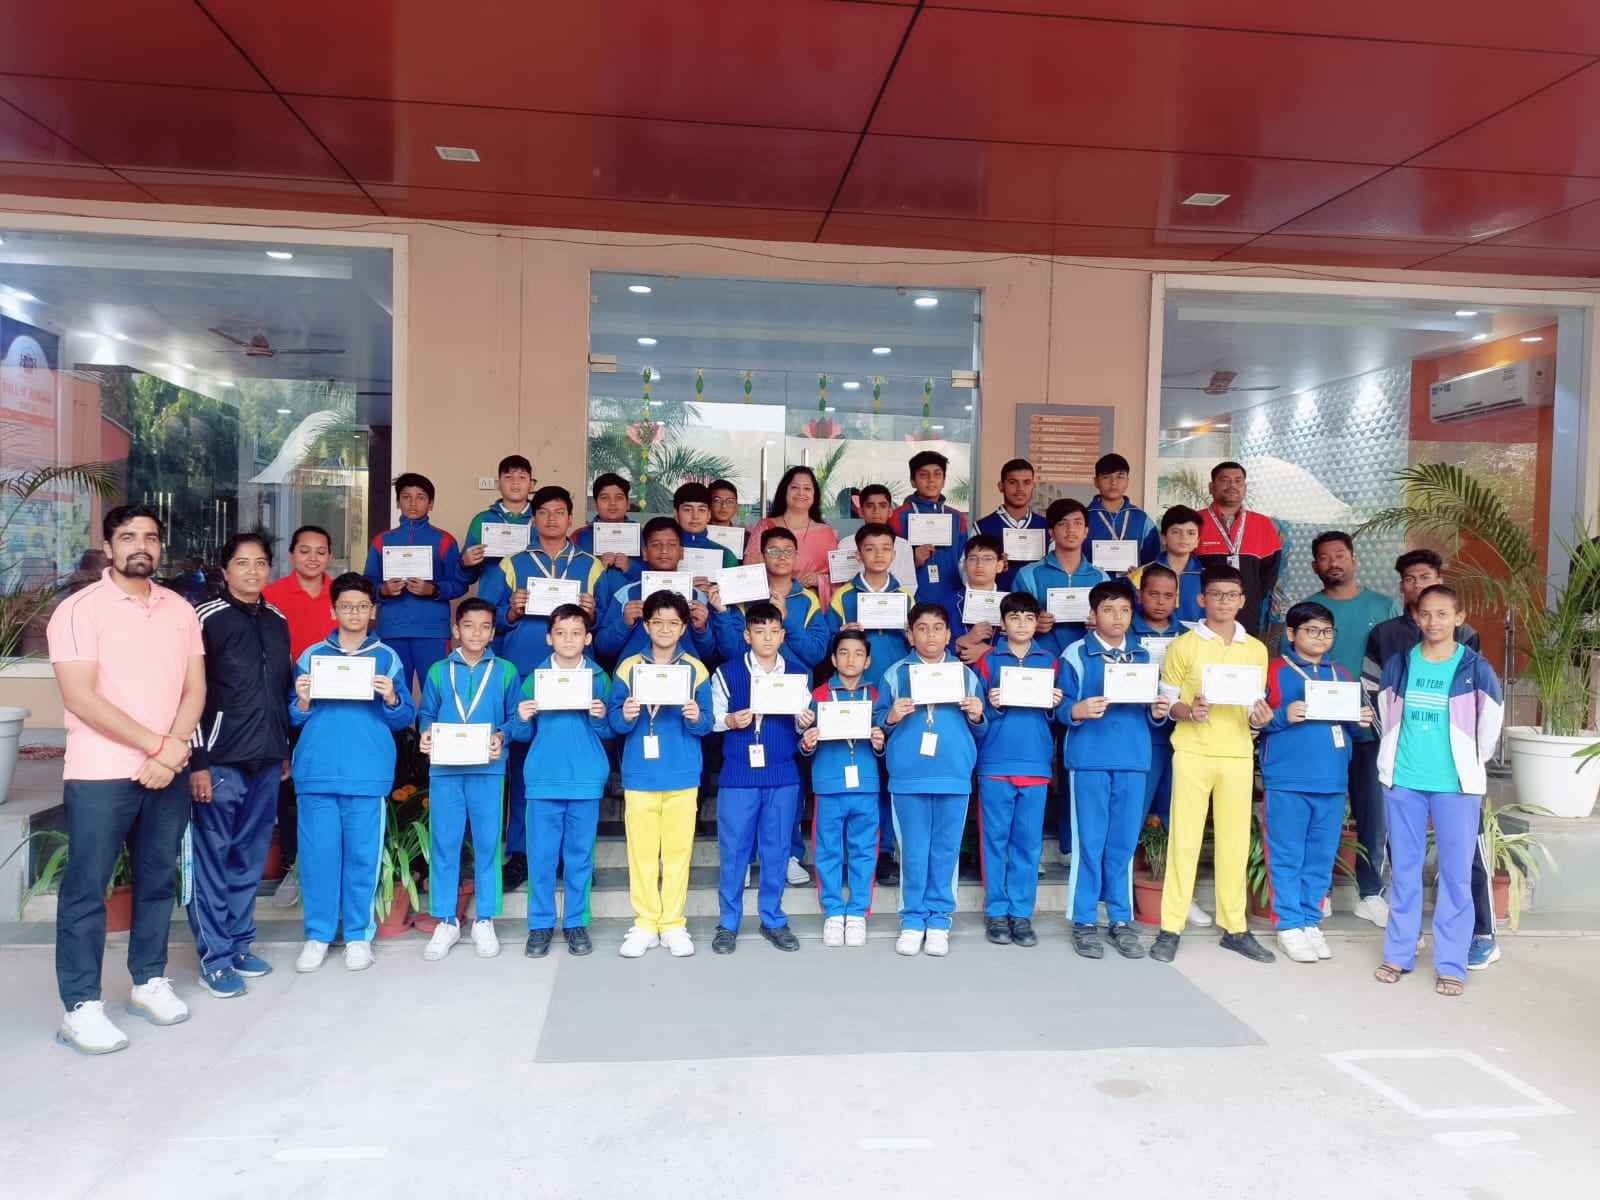 Felicitation Ceremony: Honoring Sports and Scouts & Guides achievements